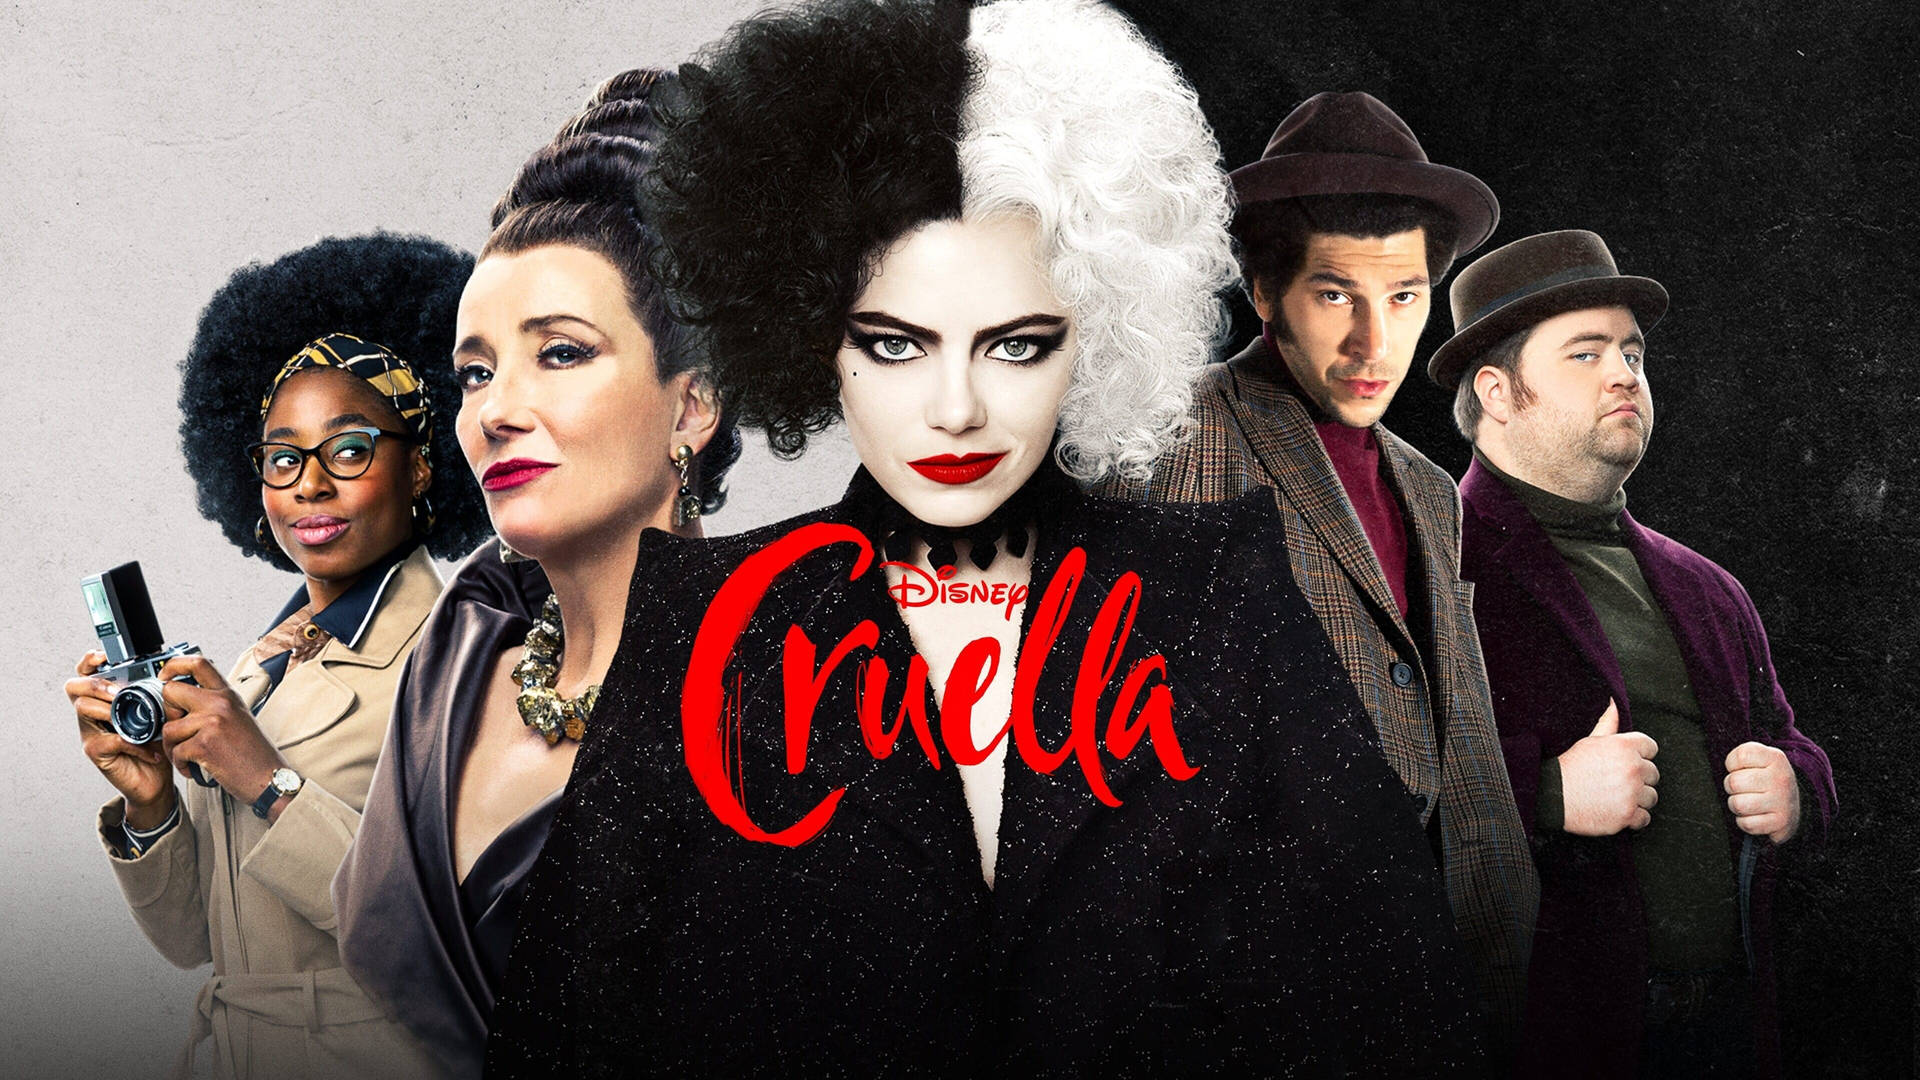 Download These Cruella Wallpapers to Add Fashion to Your Phone  D23